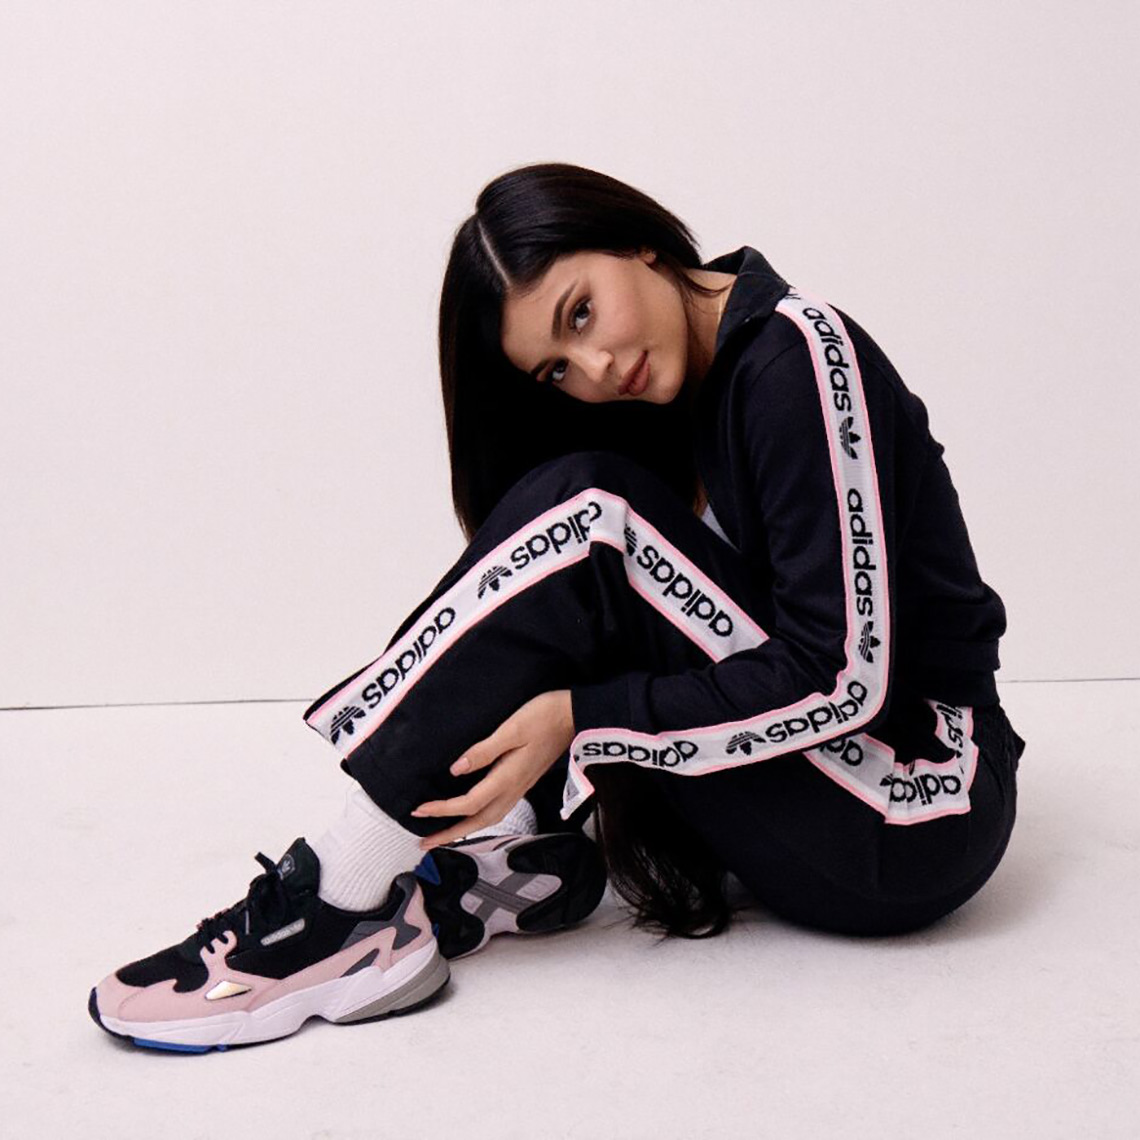 kylie shoes adidas